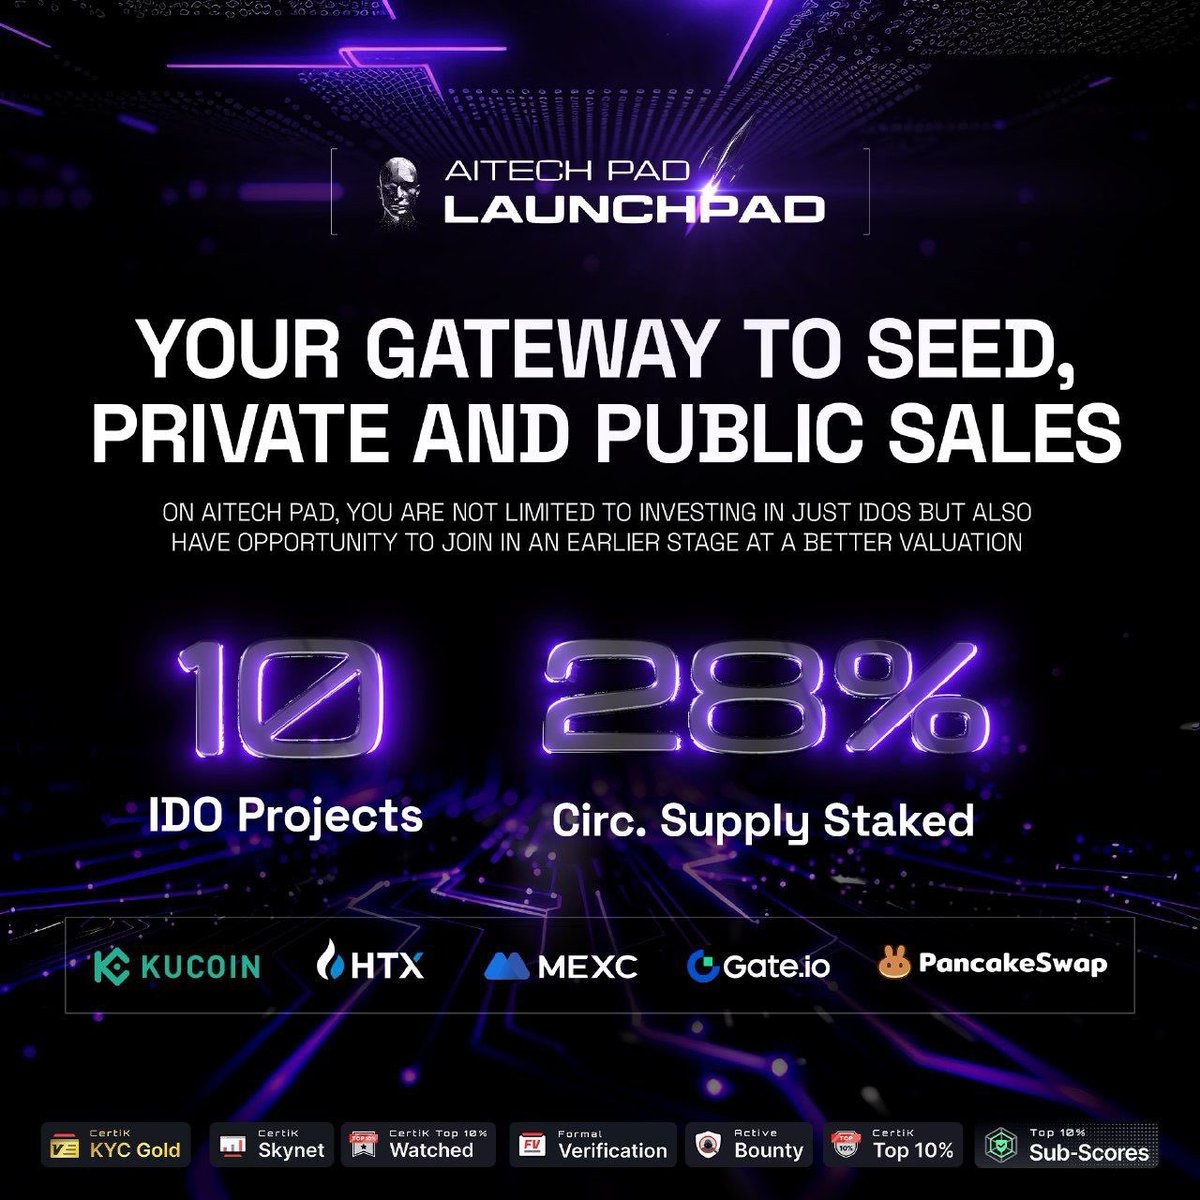 💫 AITECH Pad: Your Gateway to Seed, Private, and Public Sales!

✨ AITECH Pad is a decentralized platform for transparent Web3 fundraising, securely storing funds in smart contracts. 

ℹ️ Stats for AITECH Pad:
🔹 IDOS: 10
🔹 KYC'D Users: 12,000+
🔹 Circ. Supply Staked: 28% 
🔹